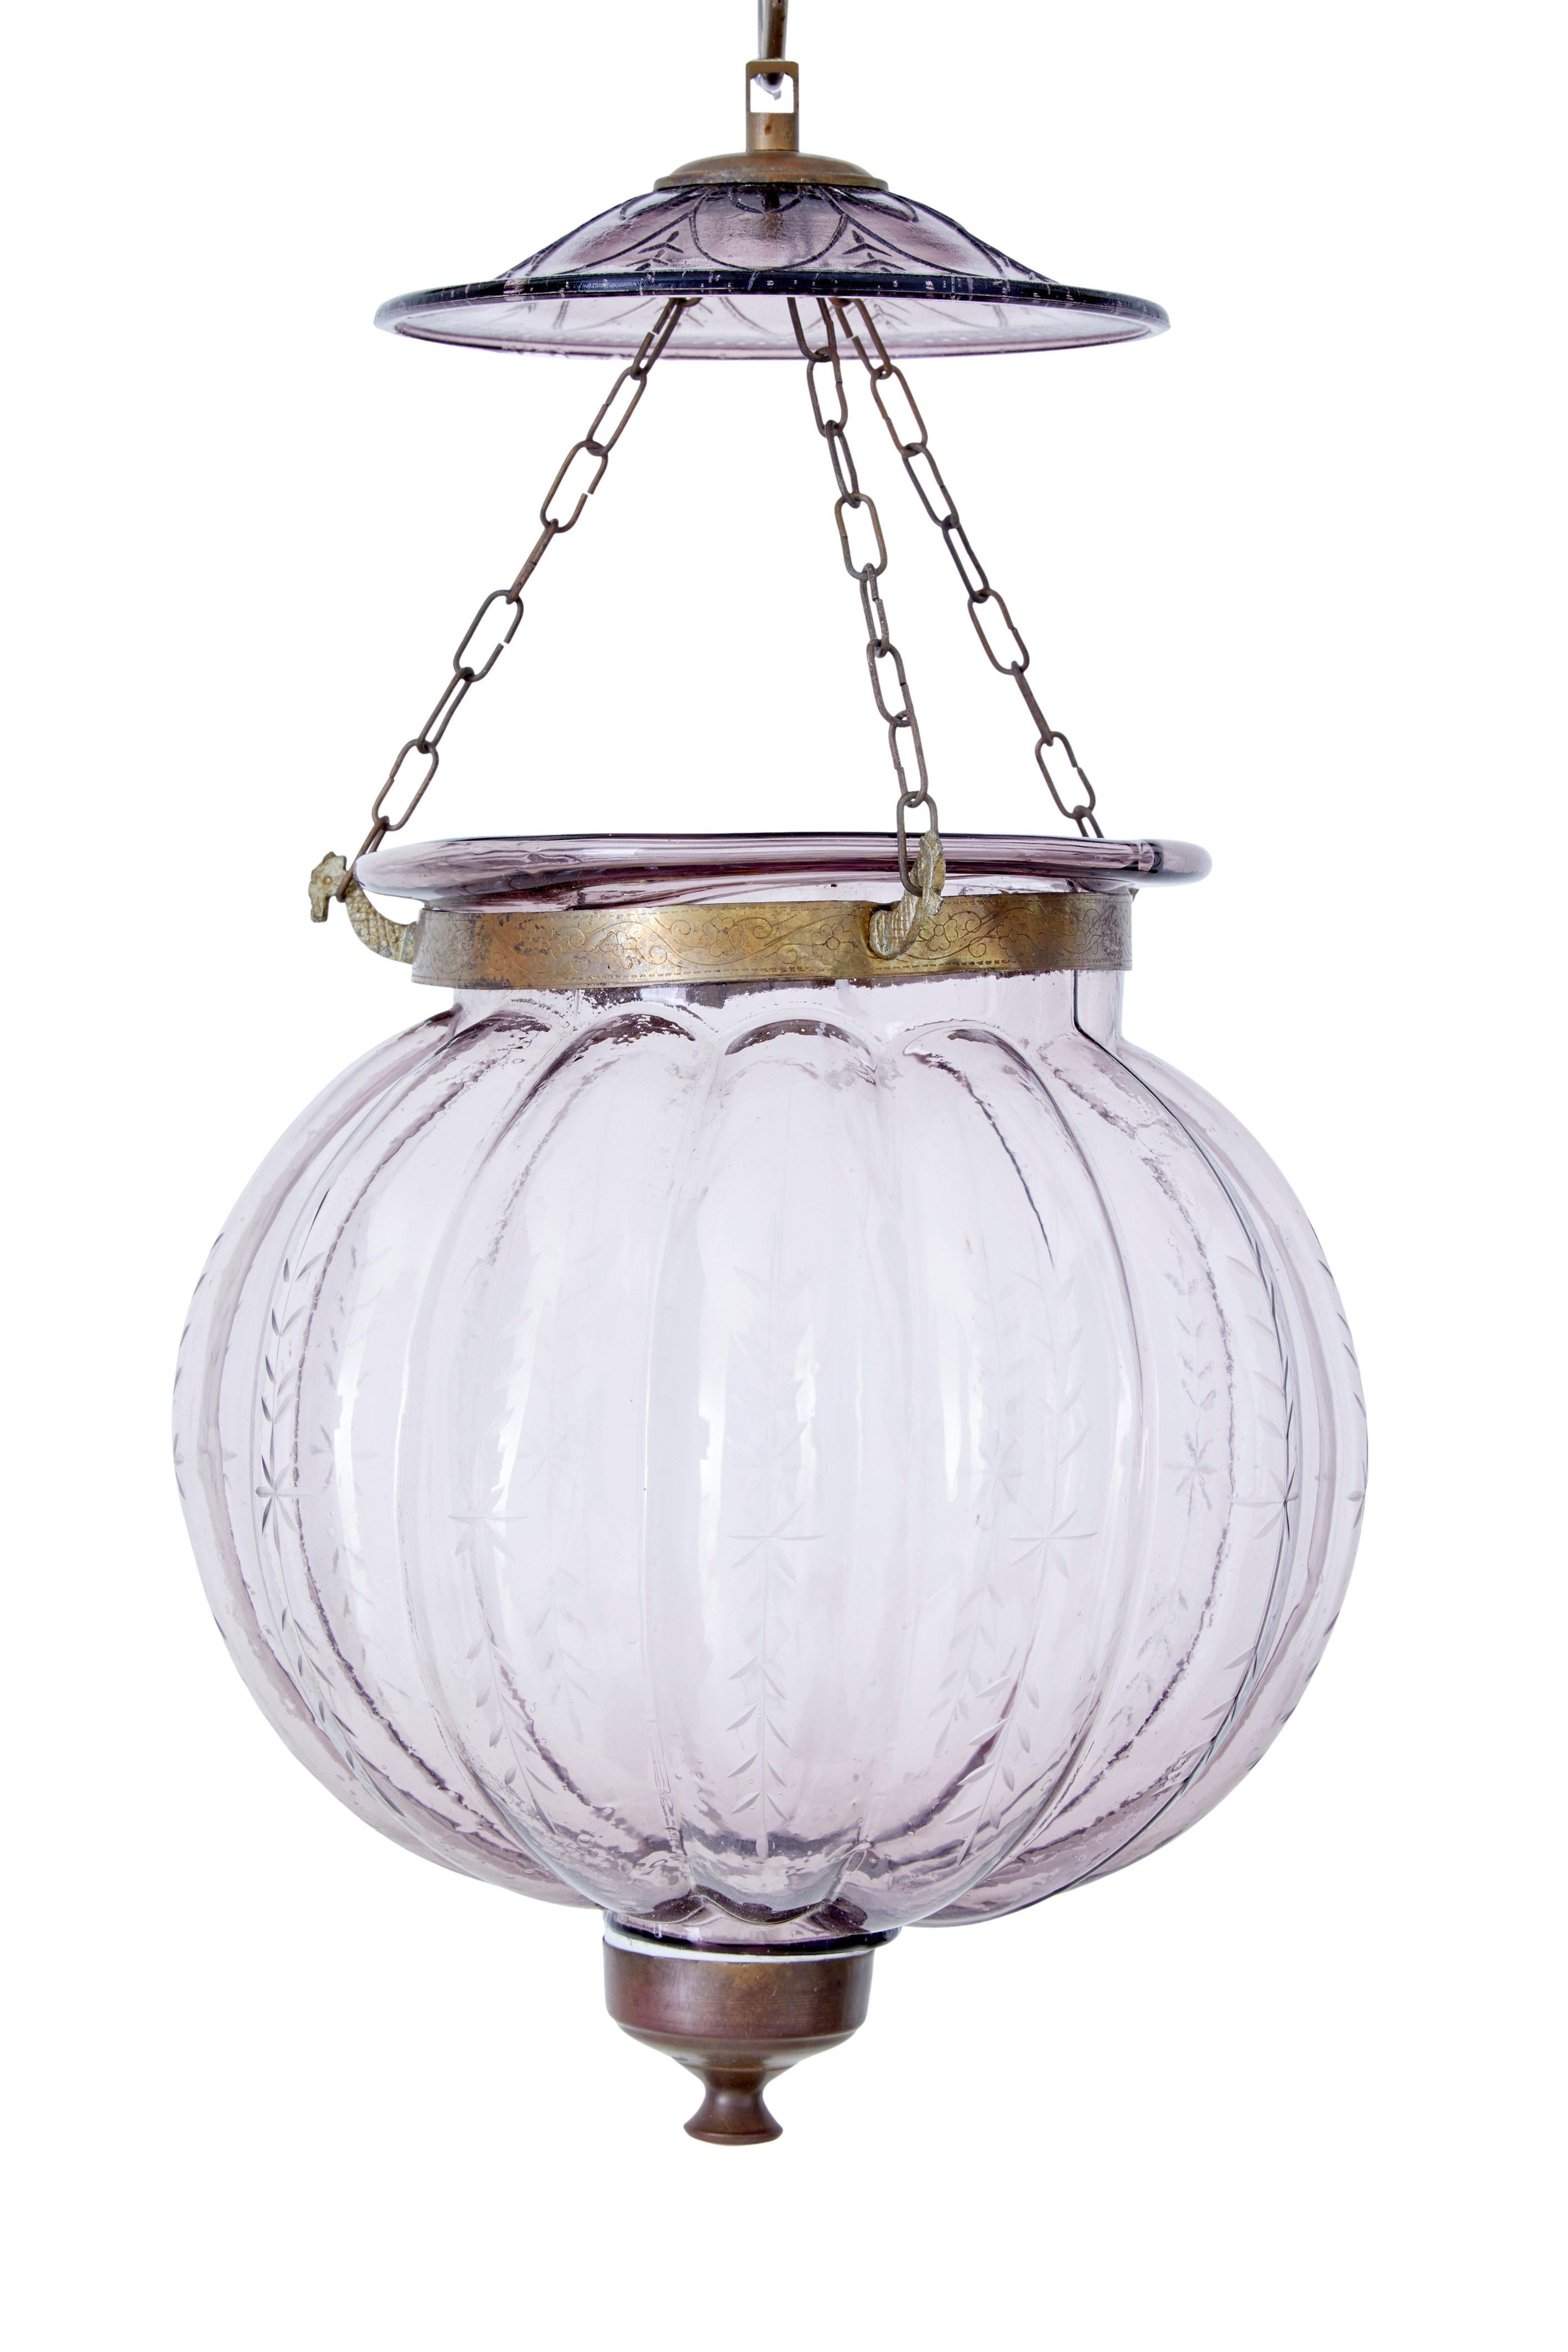 Pair of early 20th century french glass hanging lanterns circa 1920.

Delicate etched pattern along the bulbous organic shaped glass. Linked by 3 chains to the cut glass ceiling mount. Lavender coloured glass.

Ideal for use with a single candle.